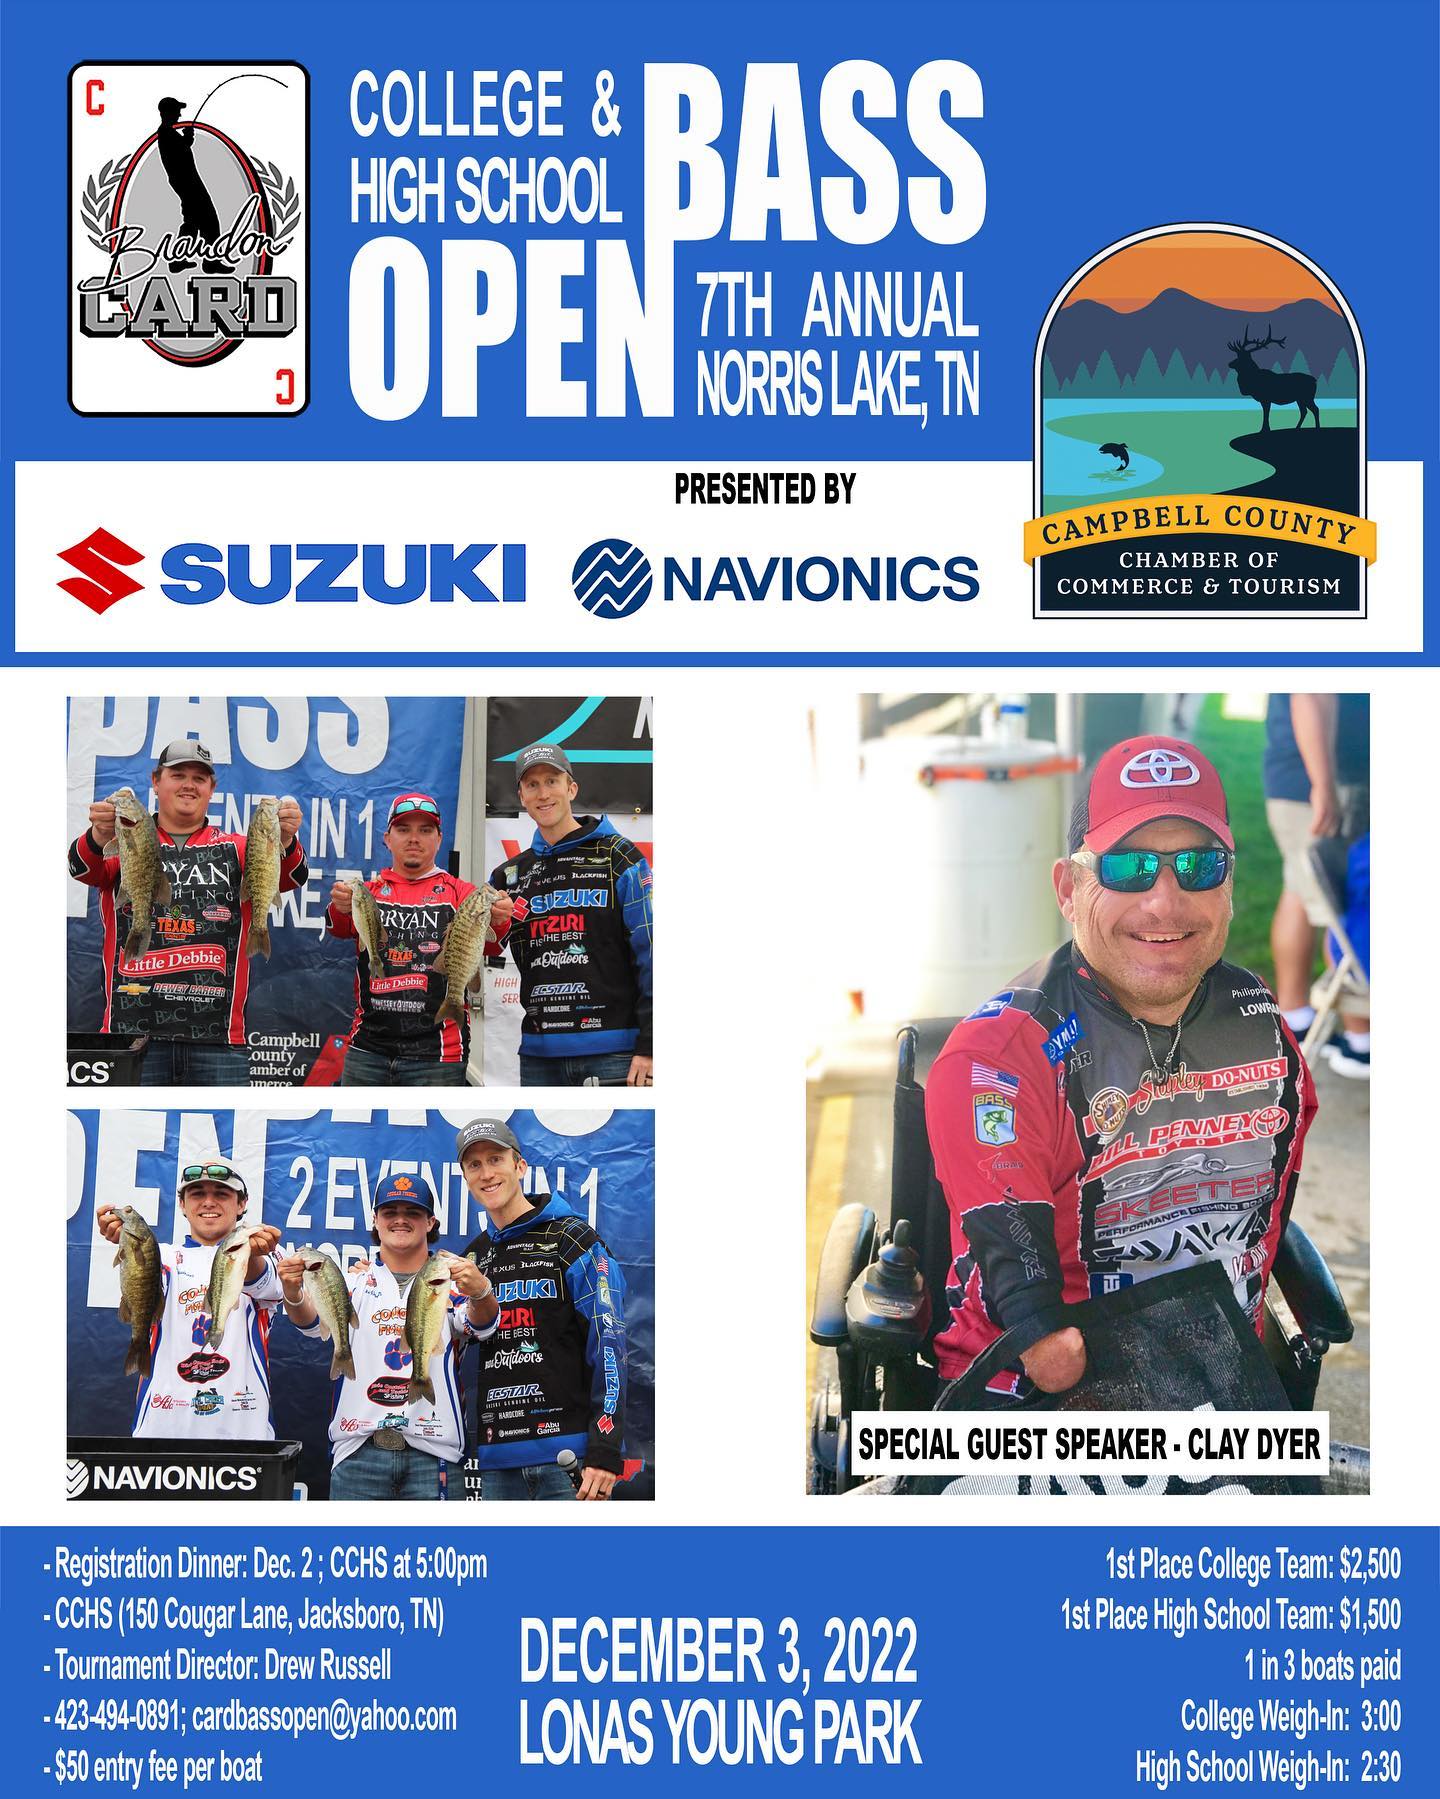 informational graphic for brandon card college and high school bass open on norris lake